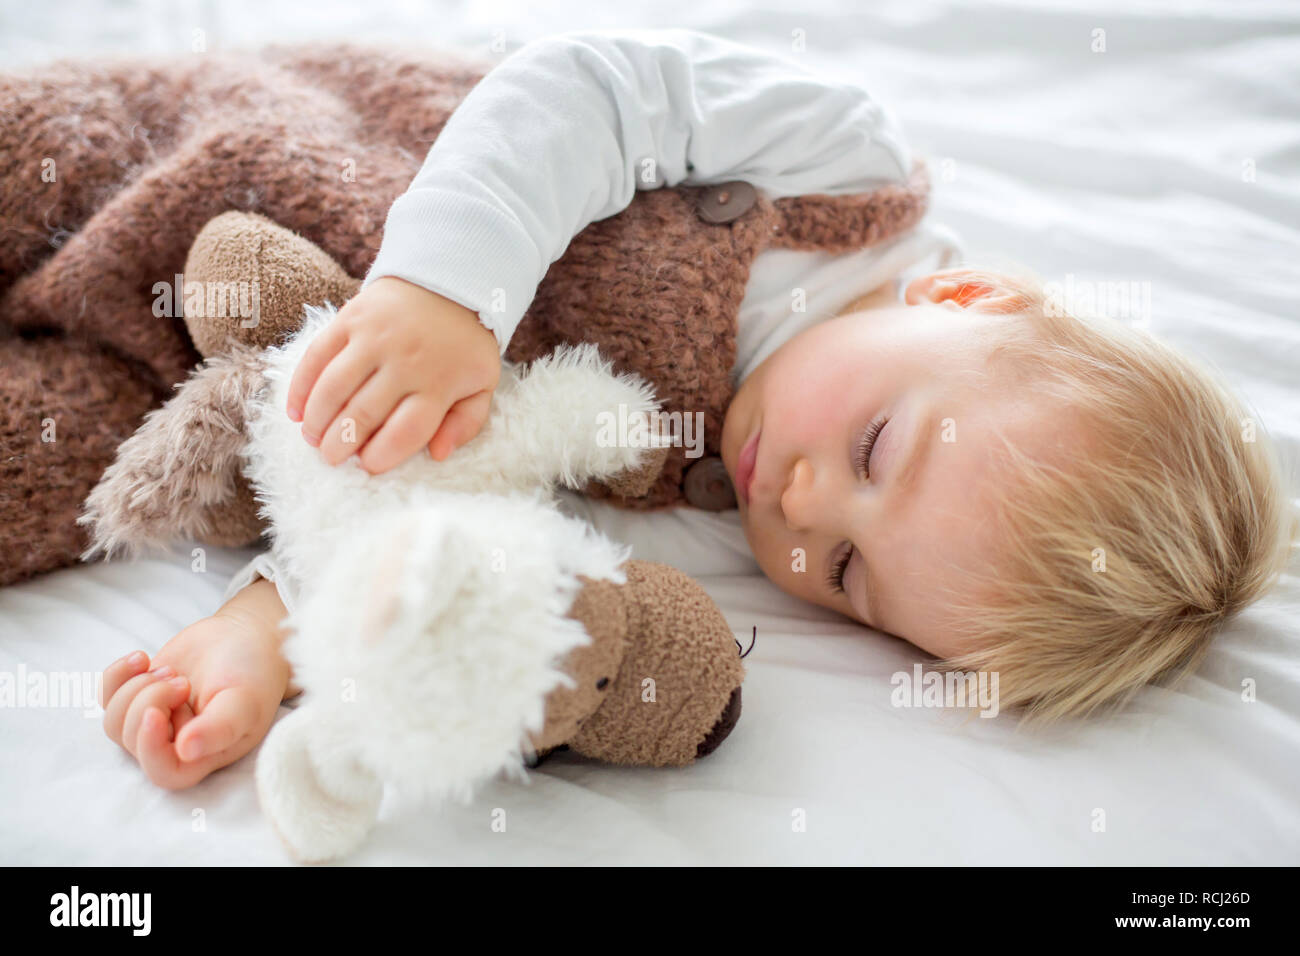 Sweet baby boy in cute overall, sleeping in bed with teddy bear ...